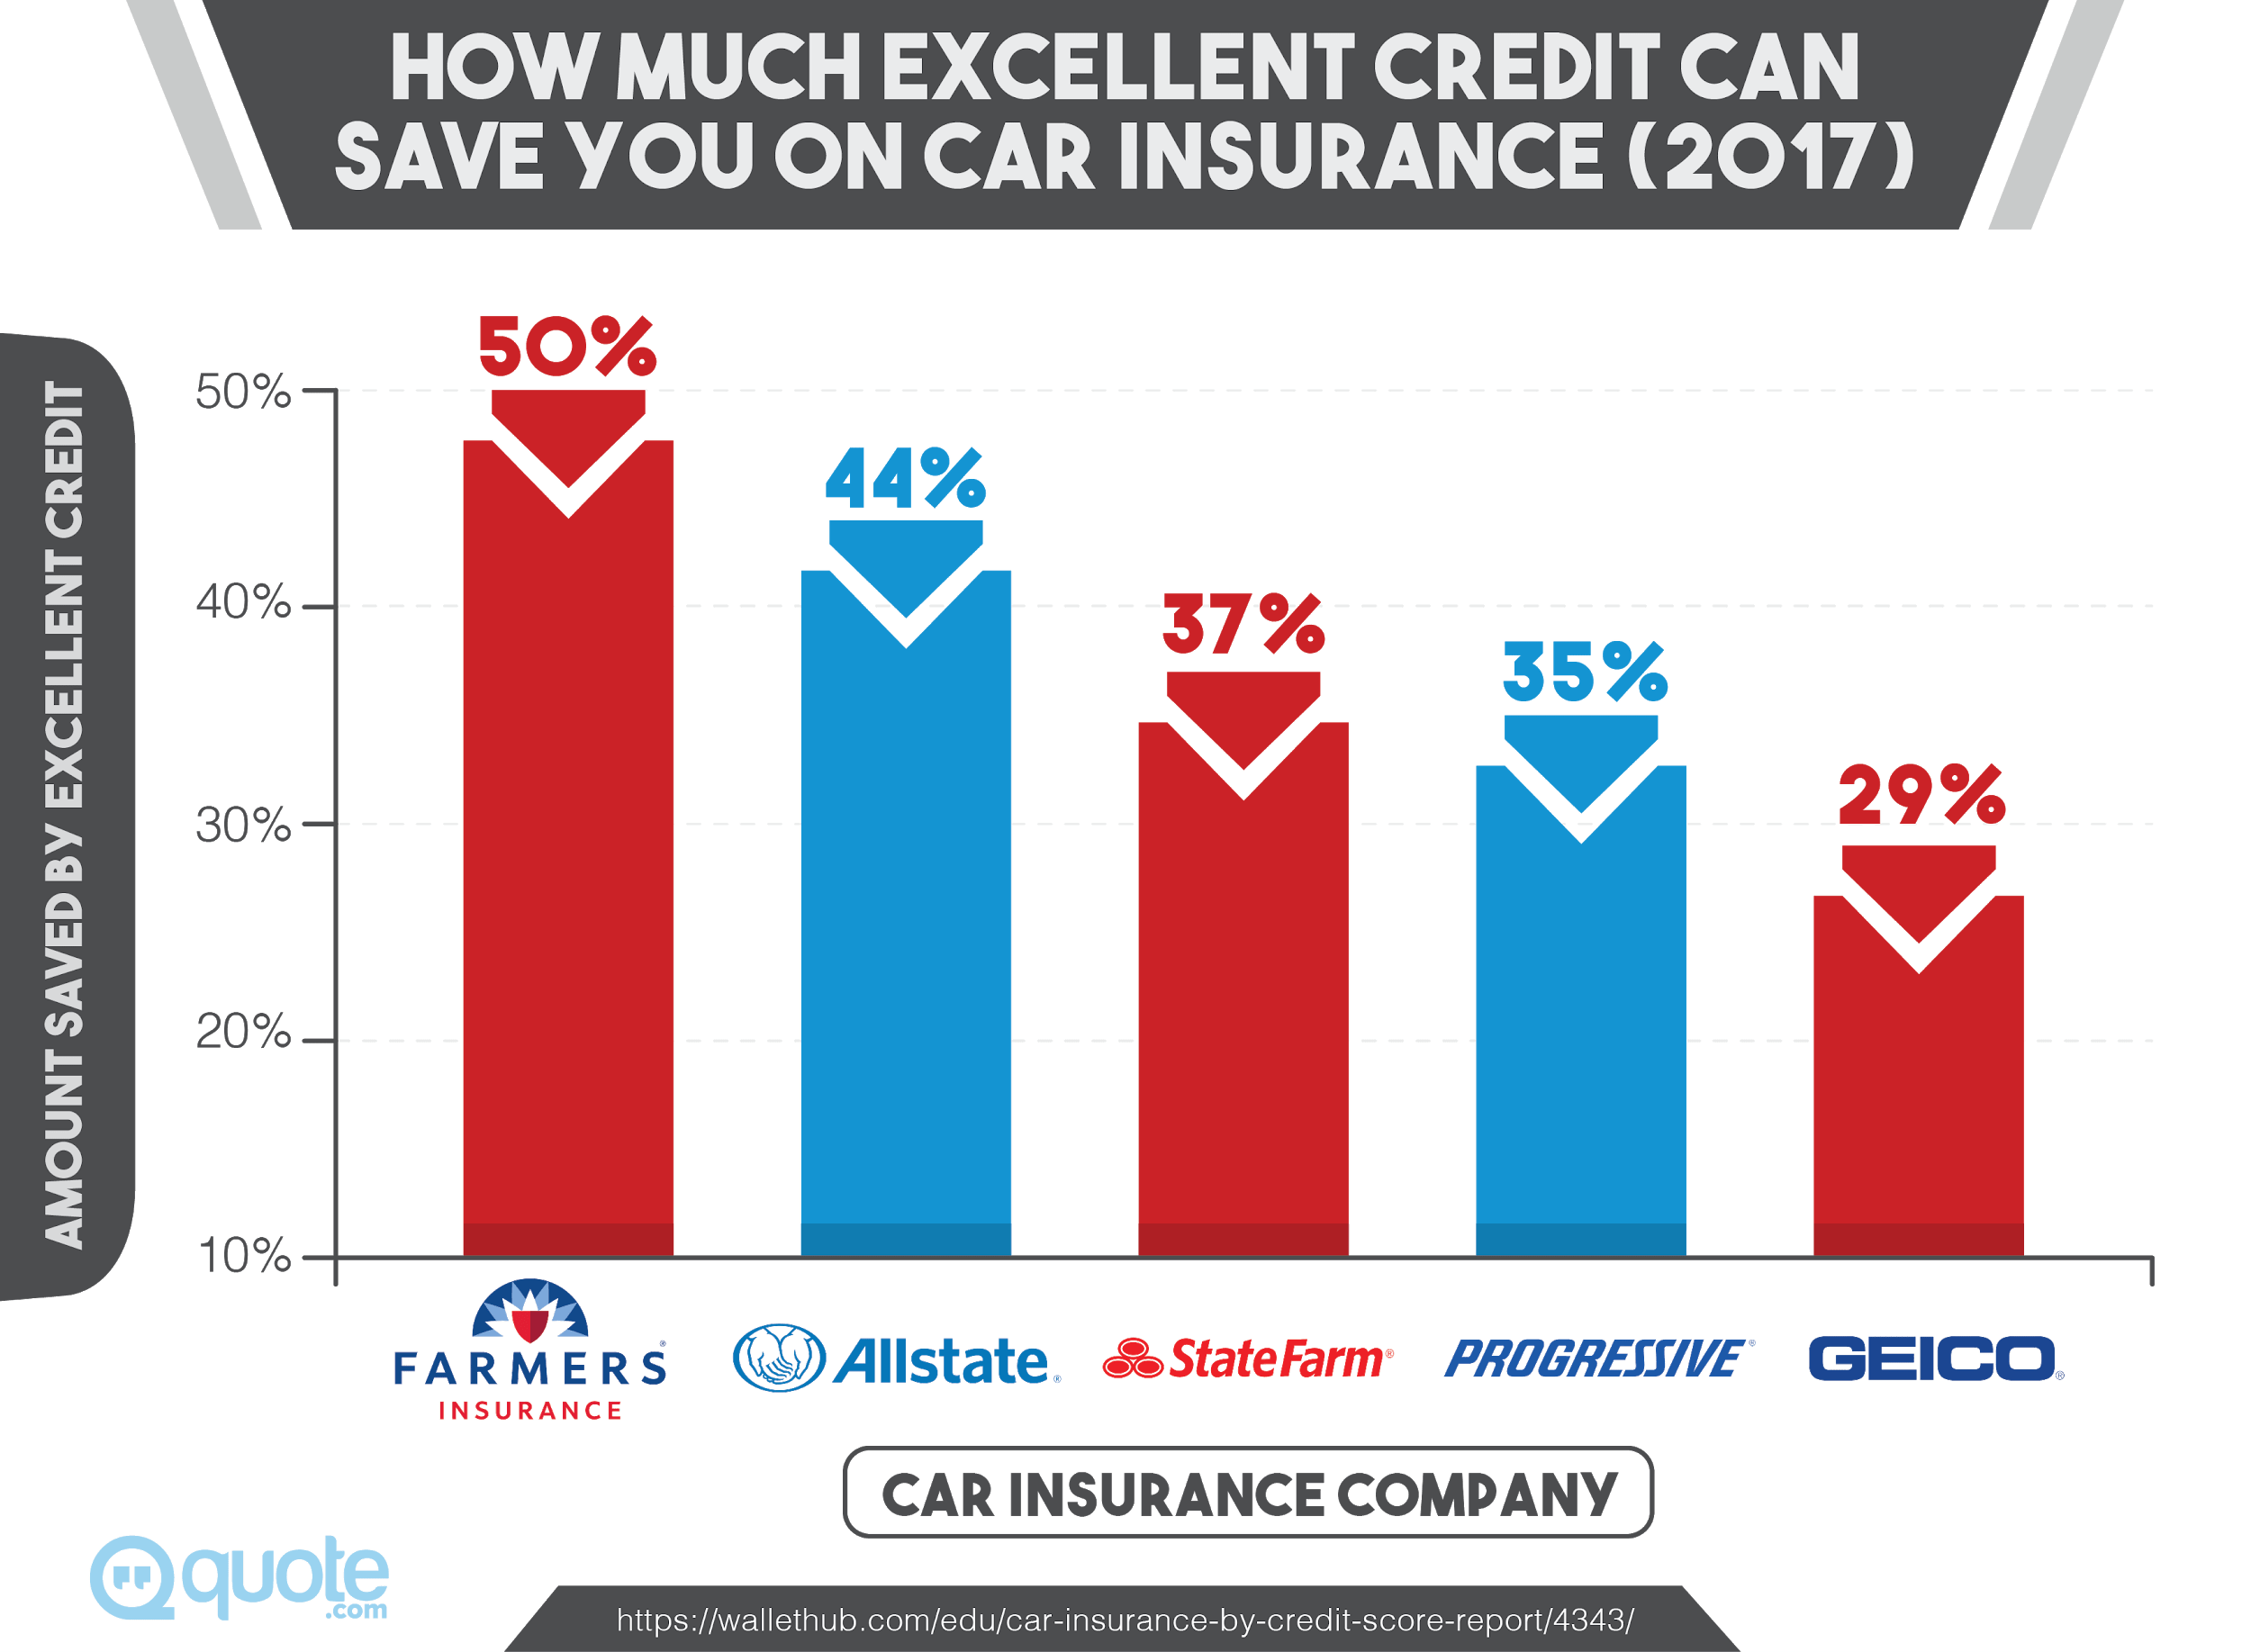 How Much Excellent Credit Can Save You on Car Insurance